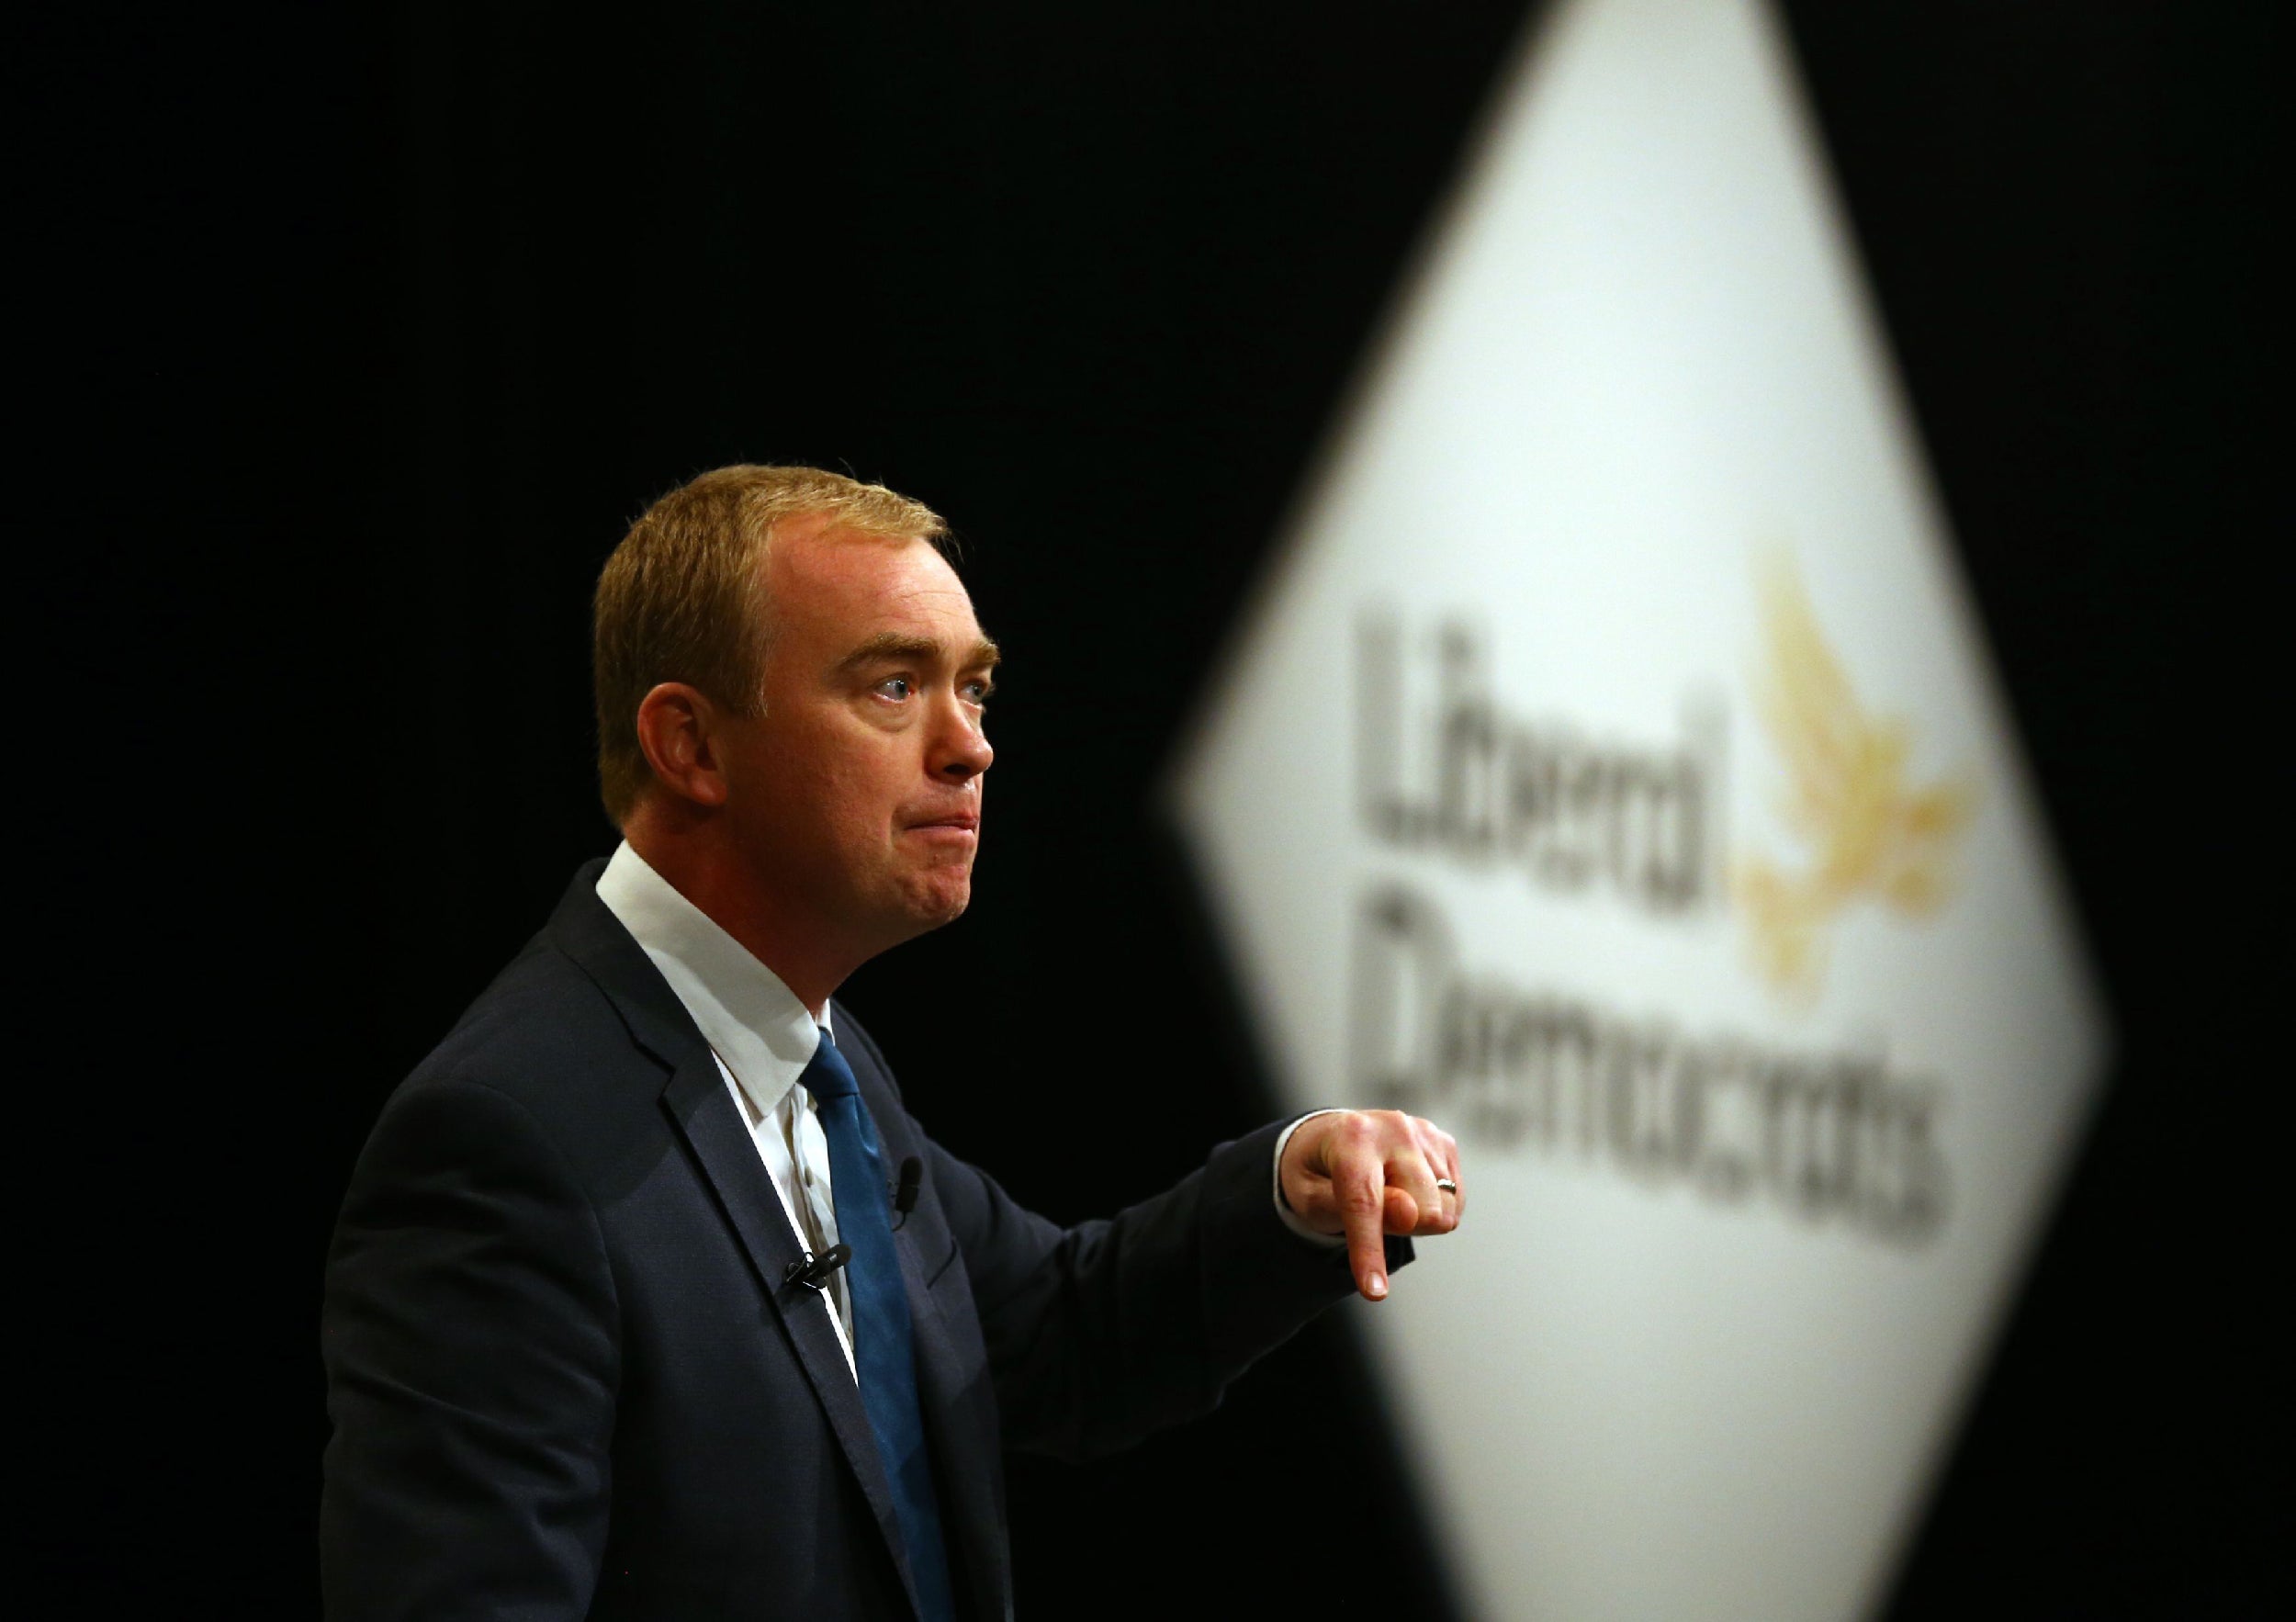 Tim Farron refuses to concede defeat on Brexit